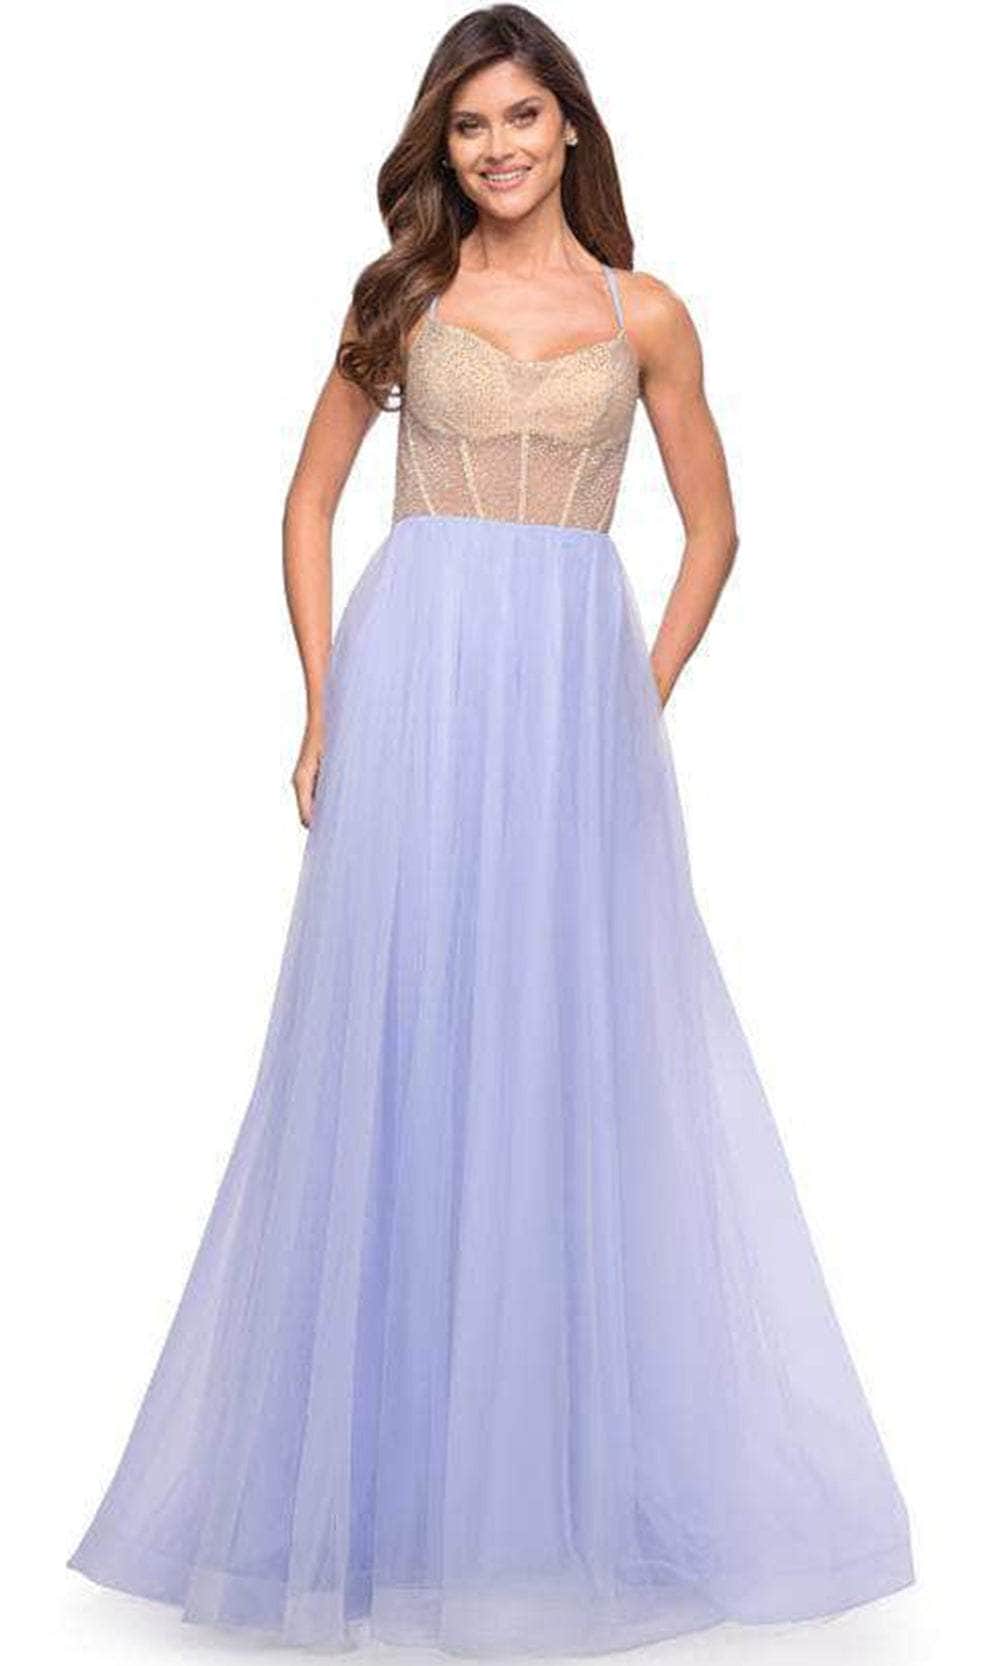 La Femme 30697 - Corset Bodice Tulle Formal Gown Special Occasion Dress 00 / Light Periwinkle